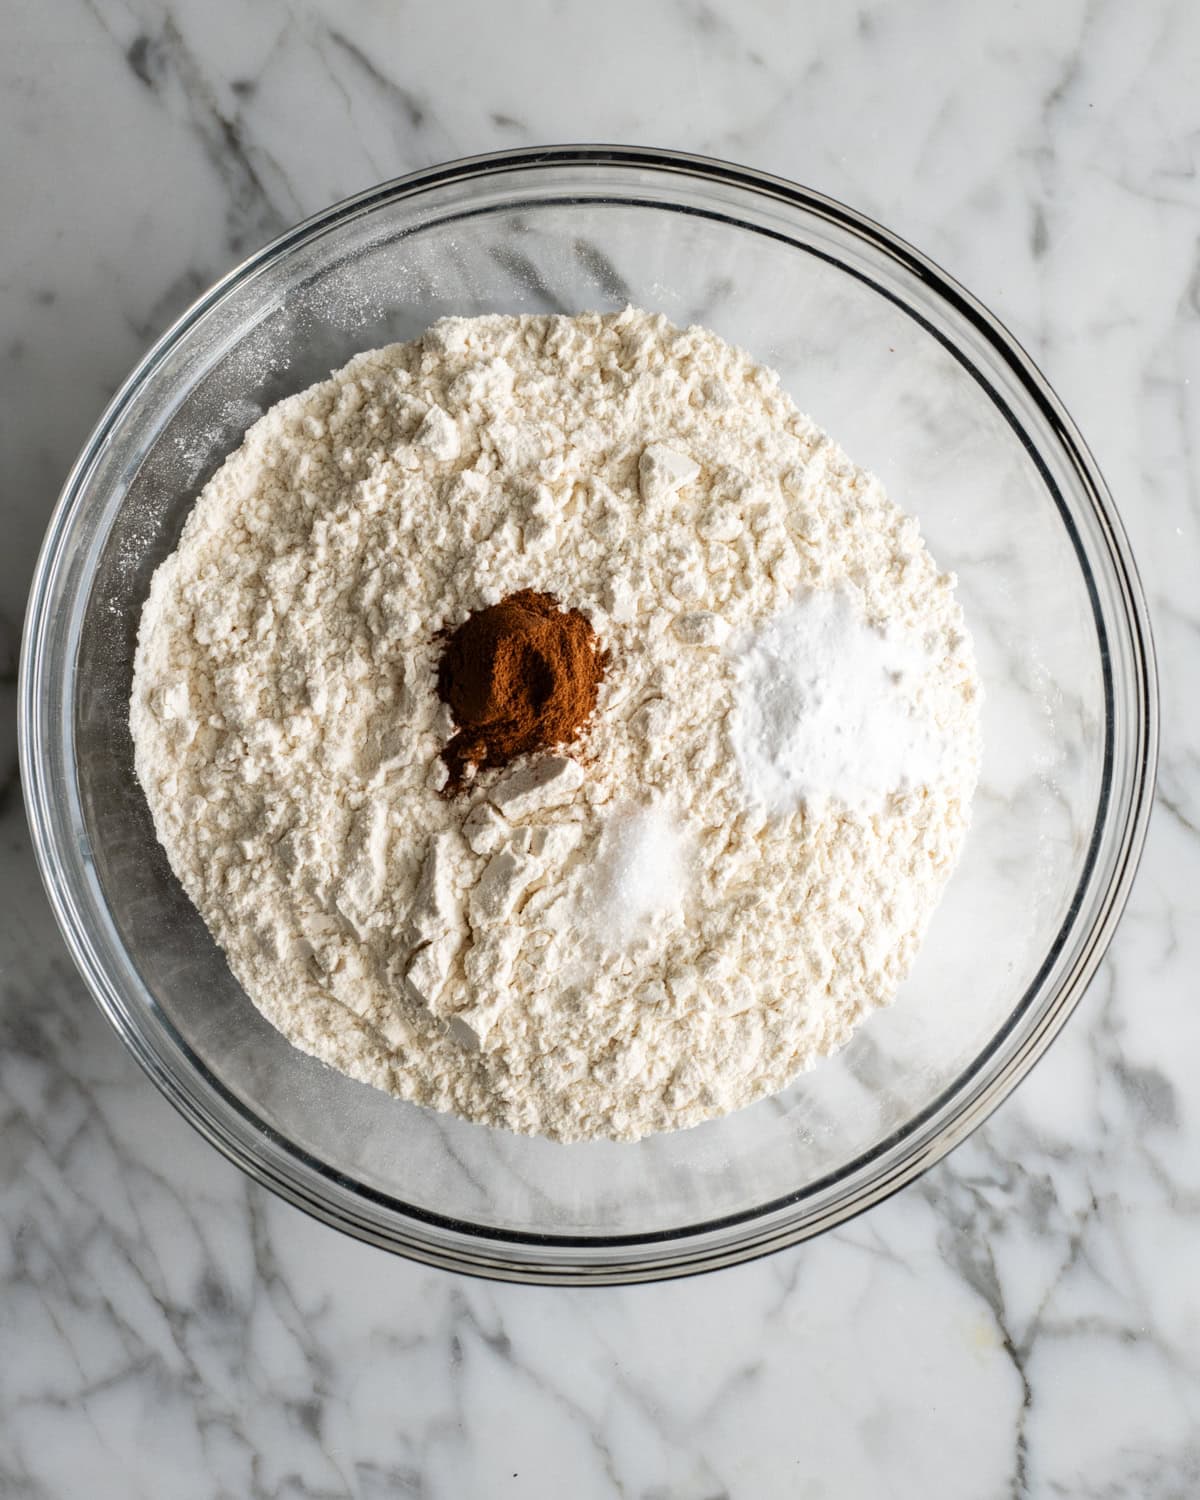 How to Make Banana Cake dry ingredients in a glass bowl